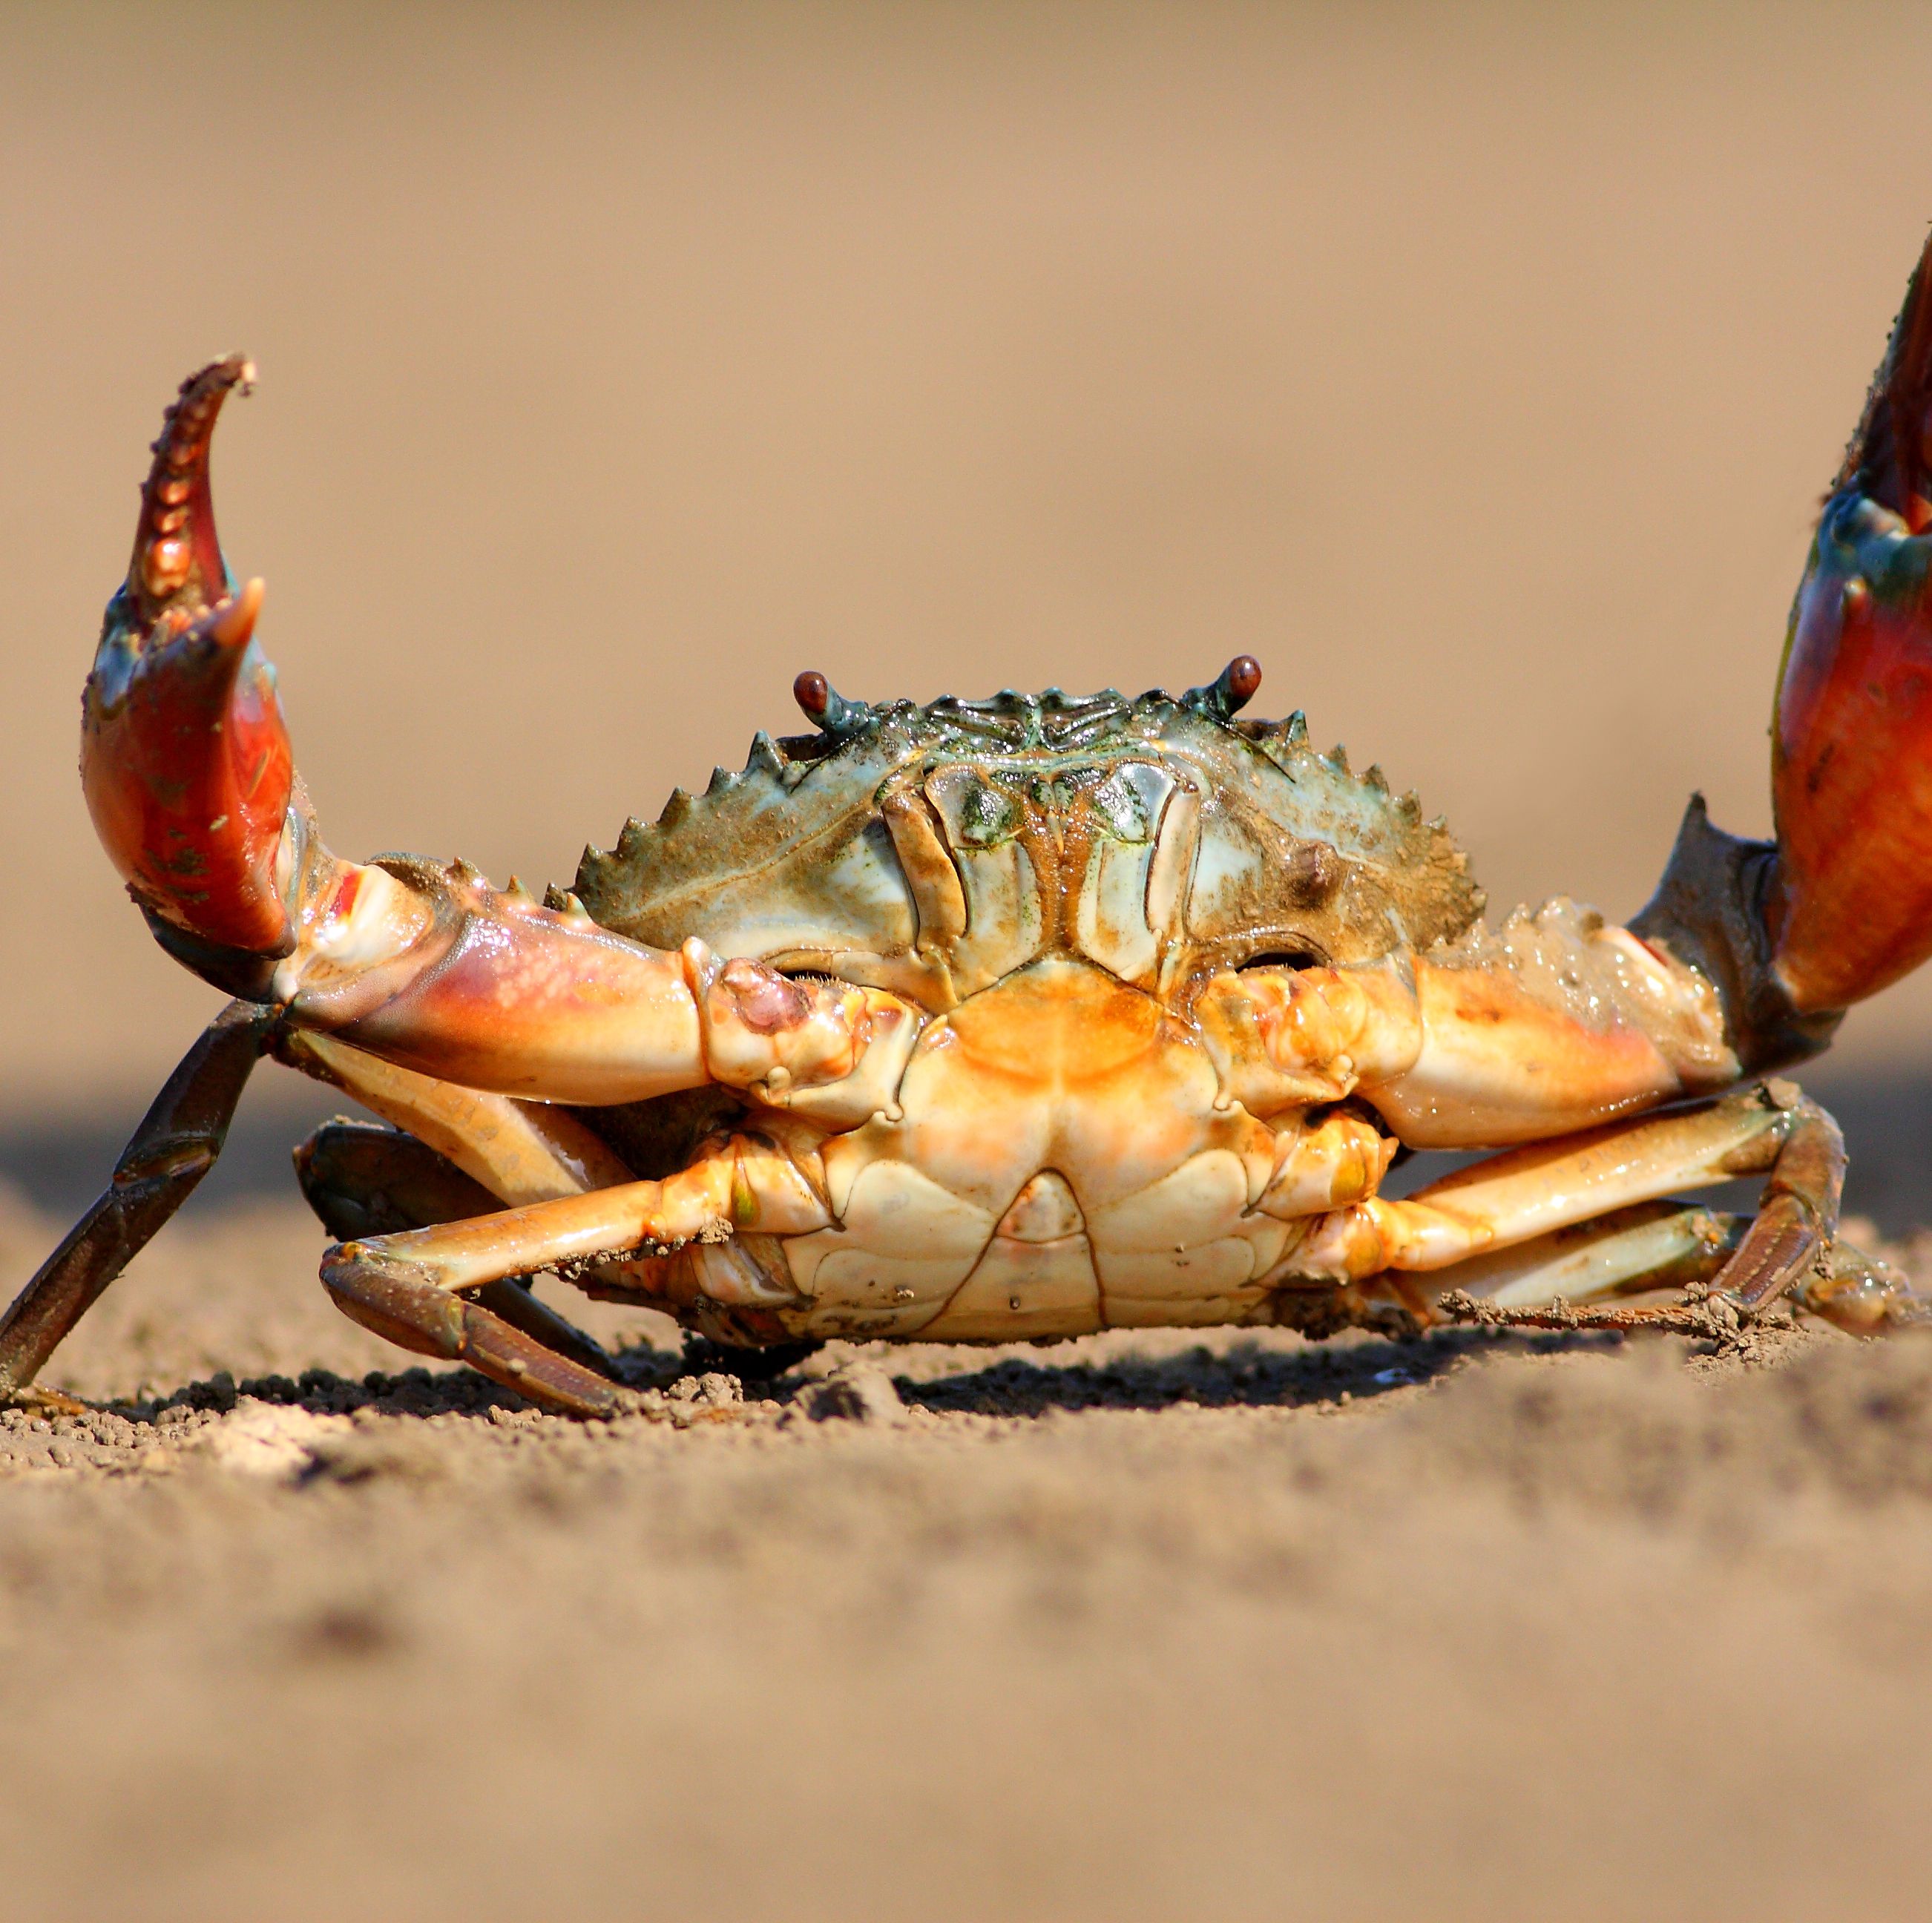 The Extraordinary Reason Why Crabs Are Taking Over the Animal Kingdom